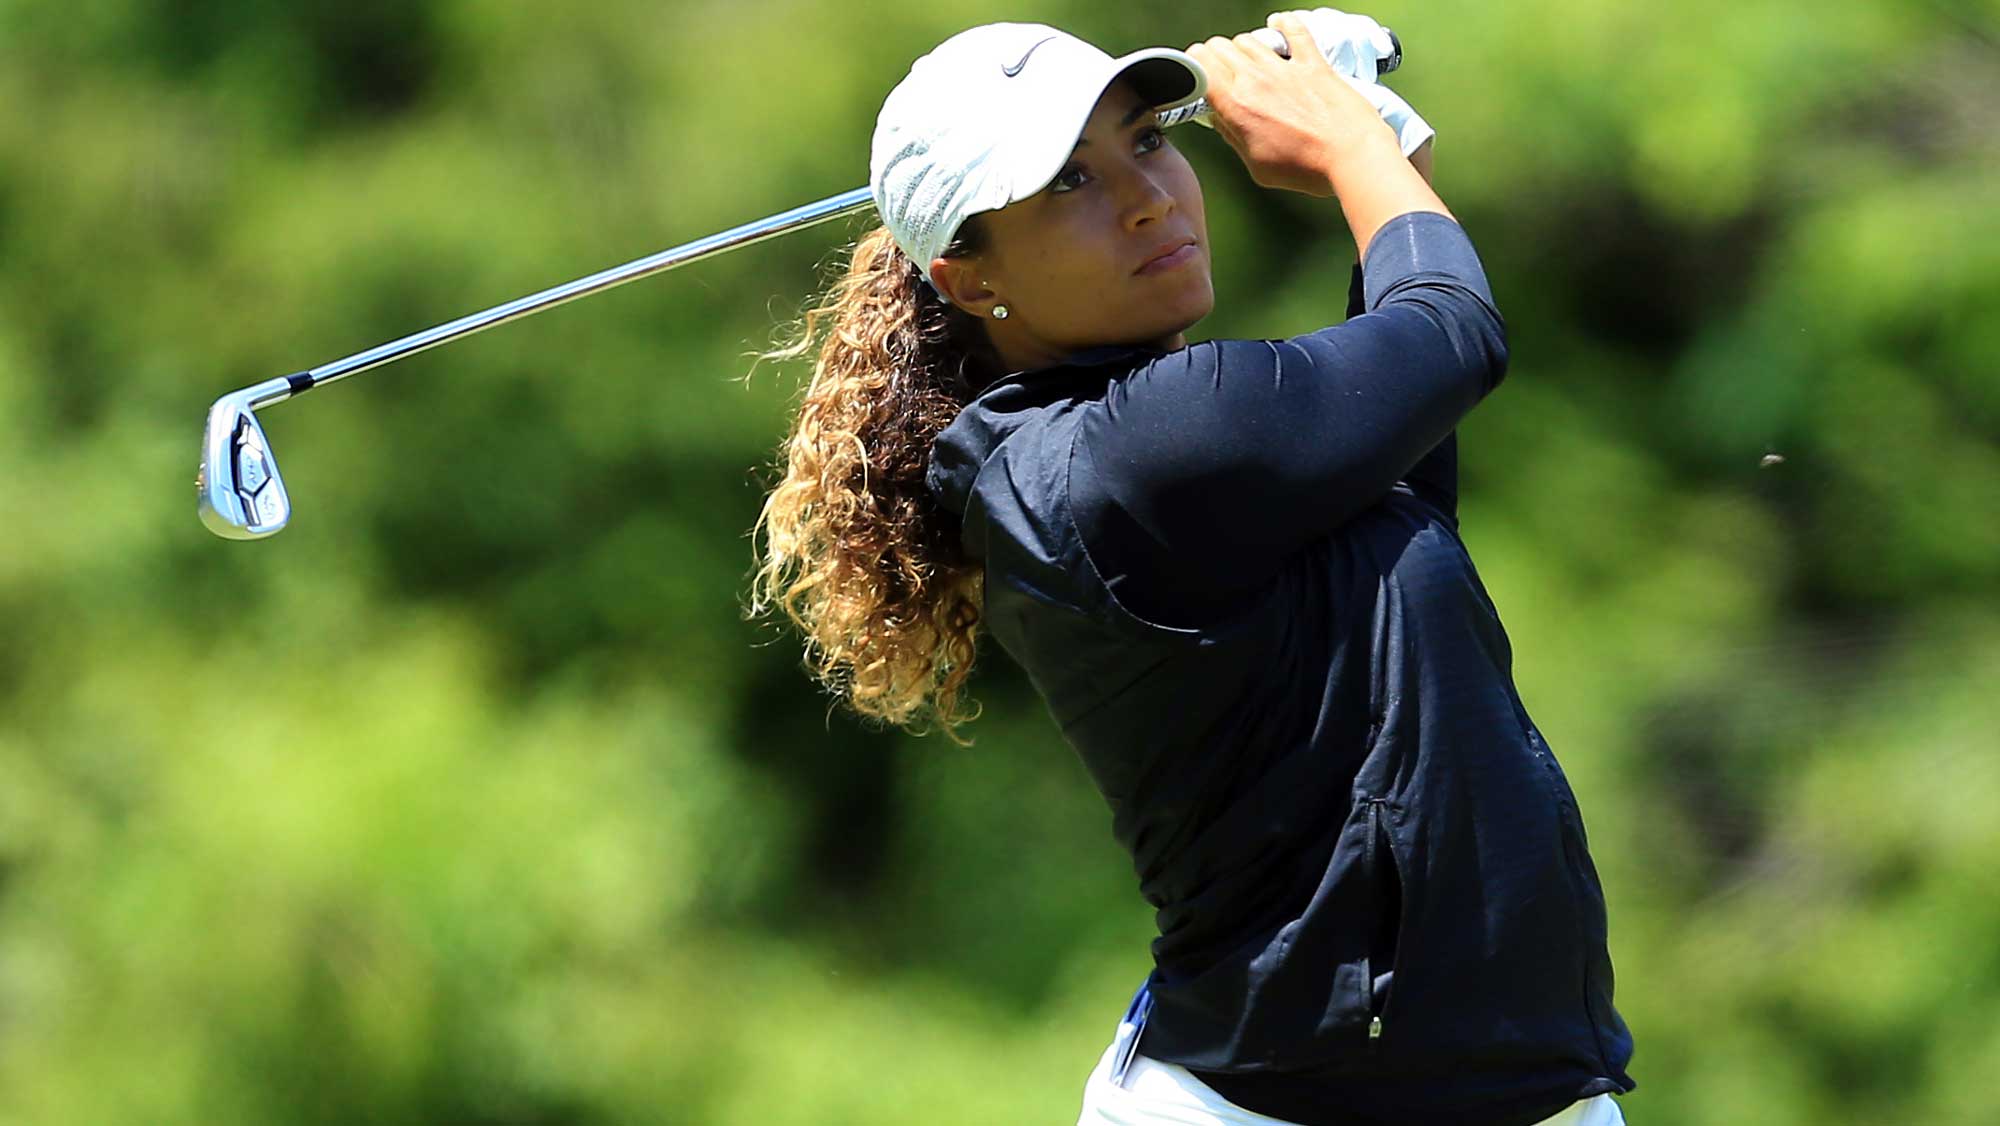 Cheyenne Woods of the USA hits her tee shot on the 13th hole during the first round of the Manulife LPGA Classic